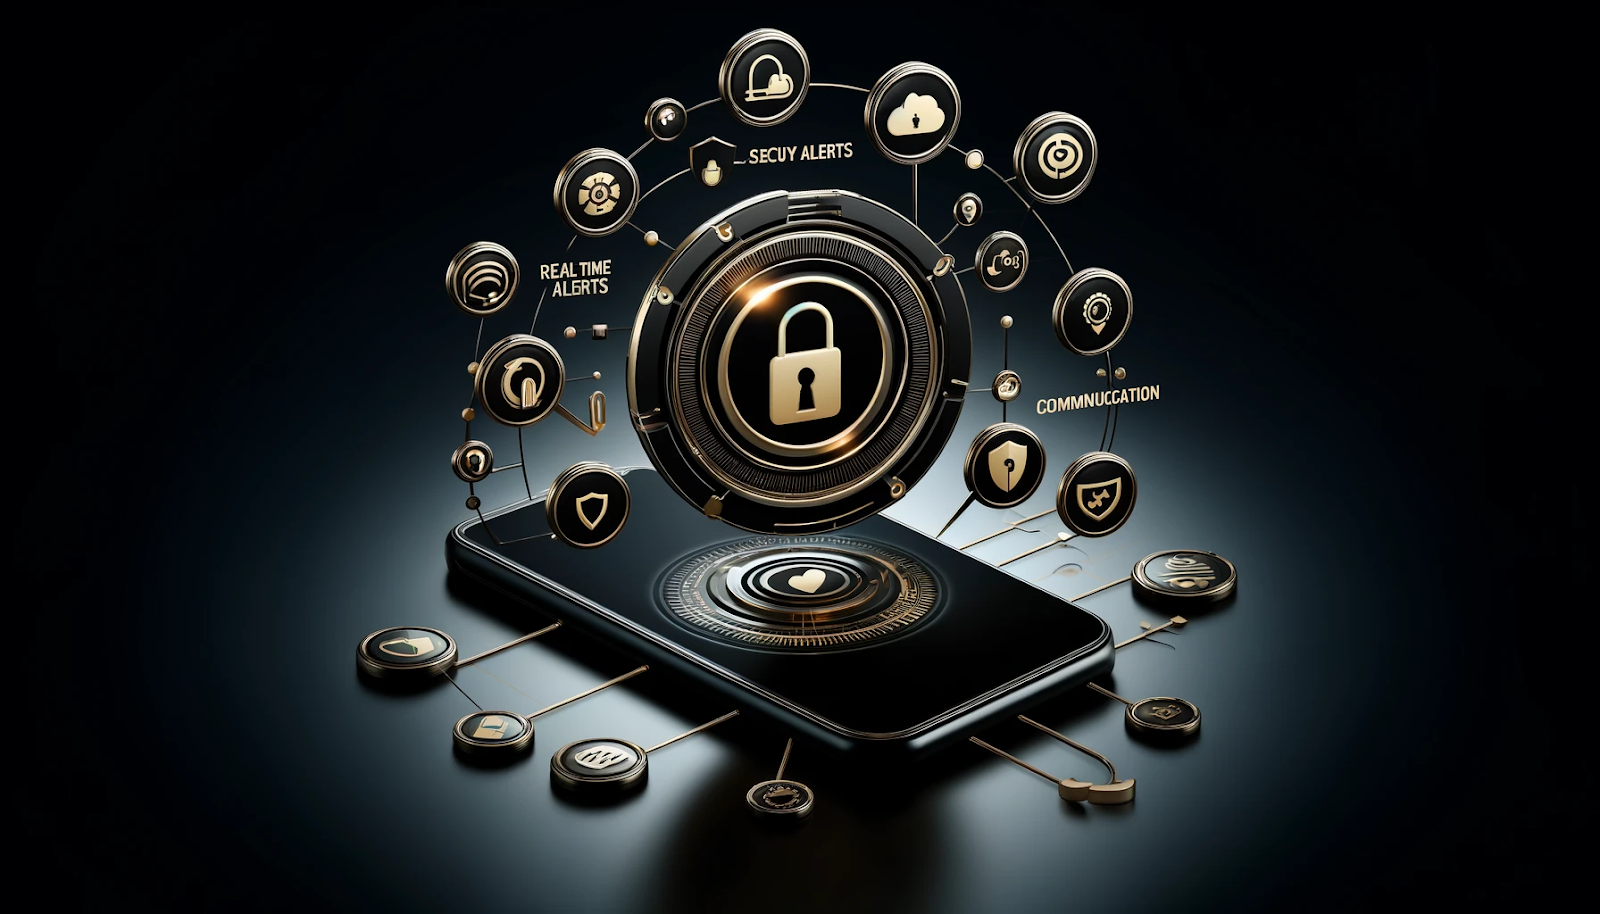 A symbolic representation of mobile security applications' impact on the security industry.  